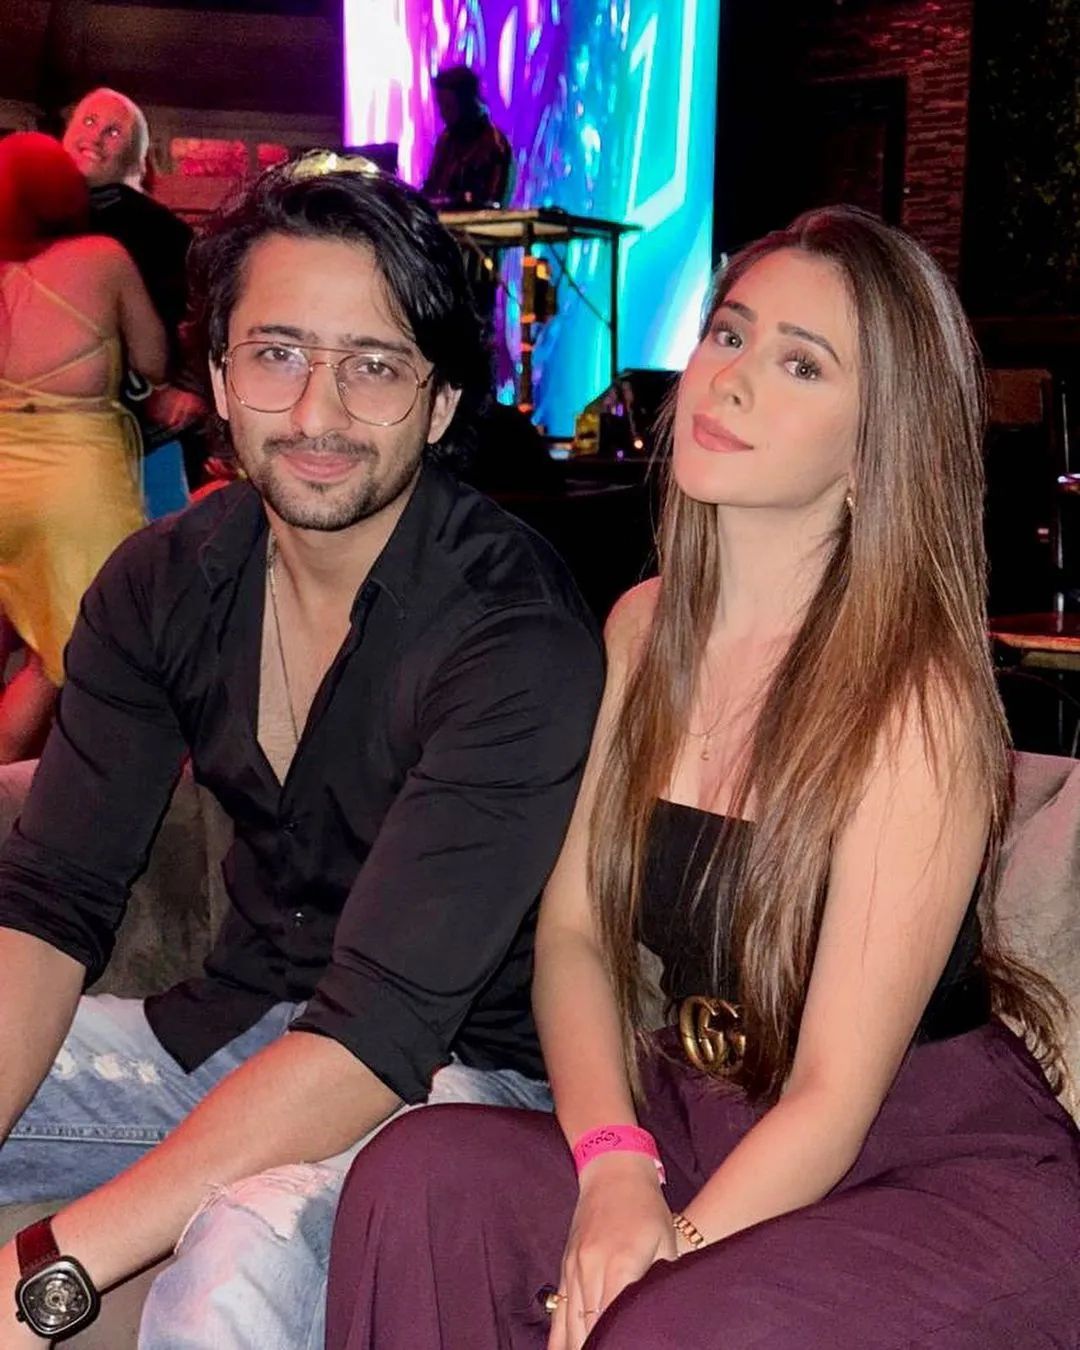 Woh Toh Hai Albeta Team Has Reunited For A Fun Get Together. In Which Shaheer Sheikh, Hiba Nawab, And Few Other Have Seen In The Pictures